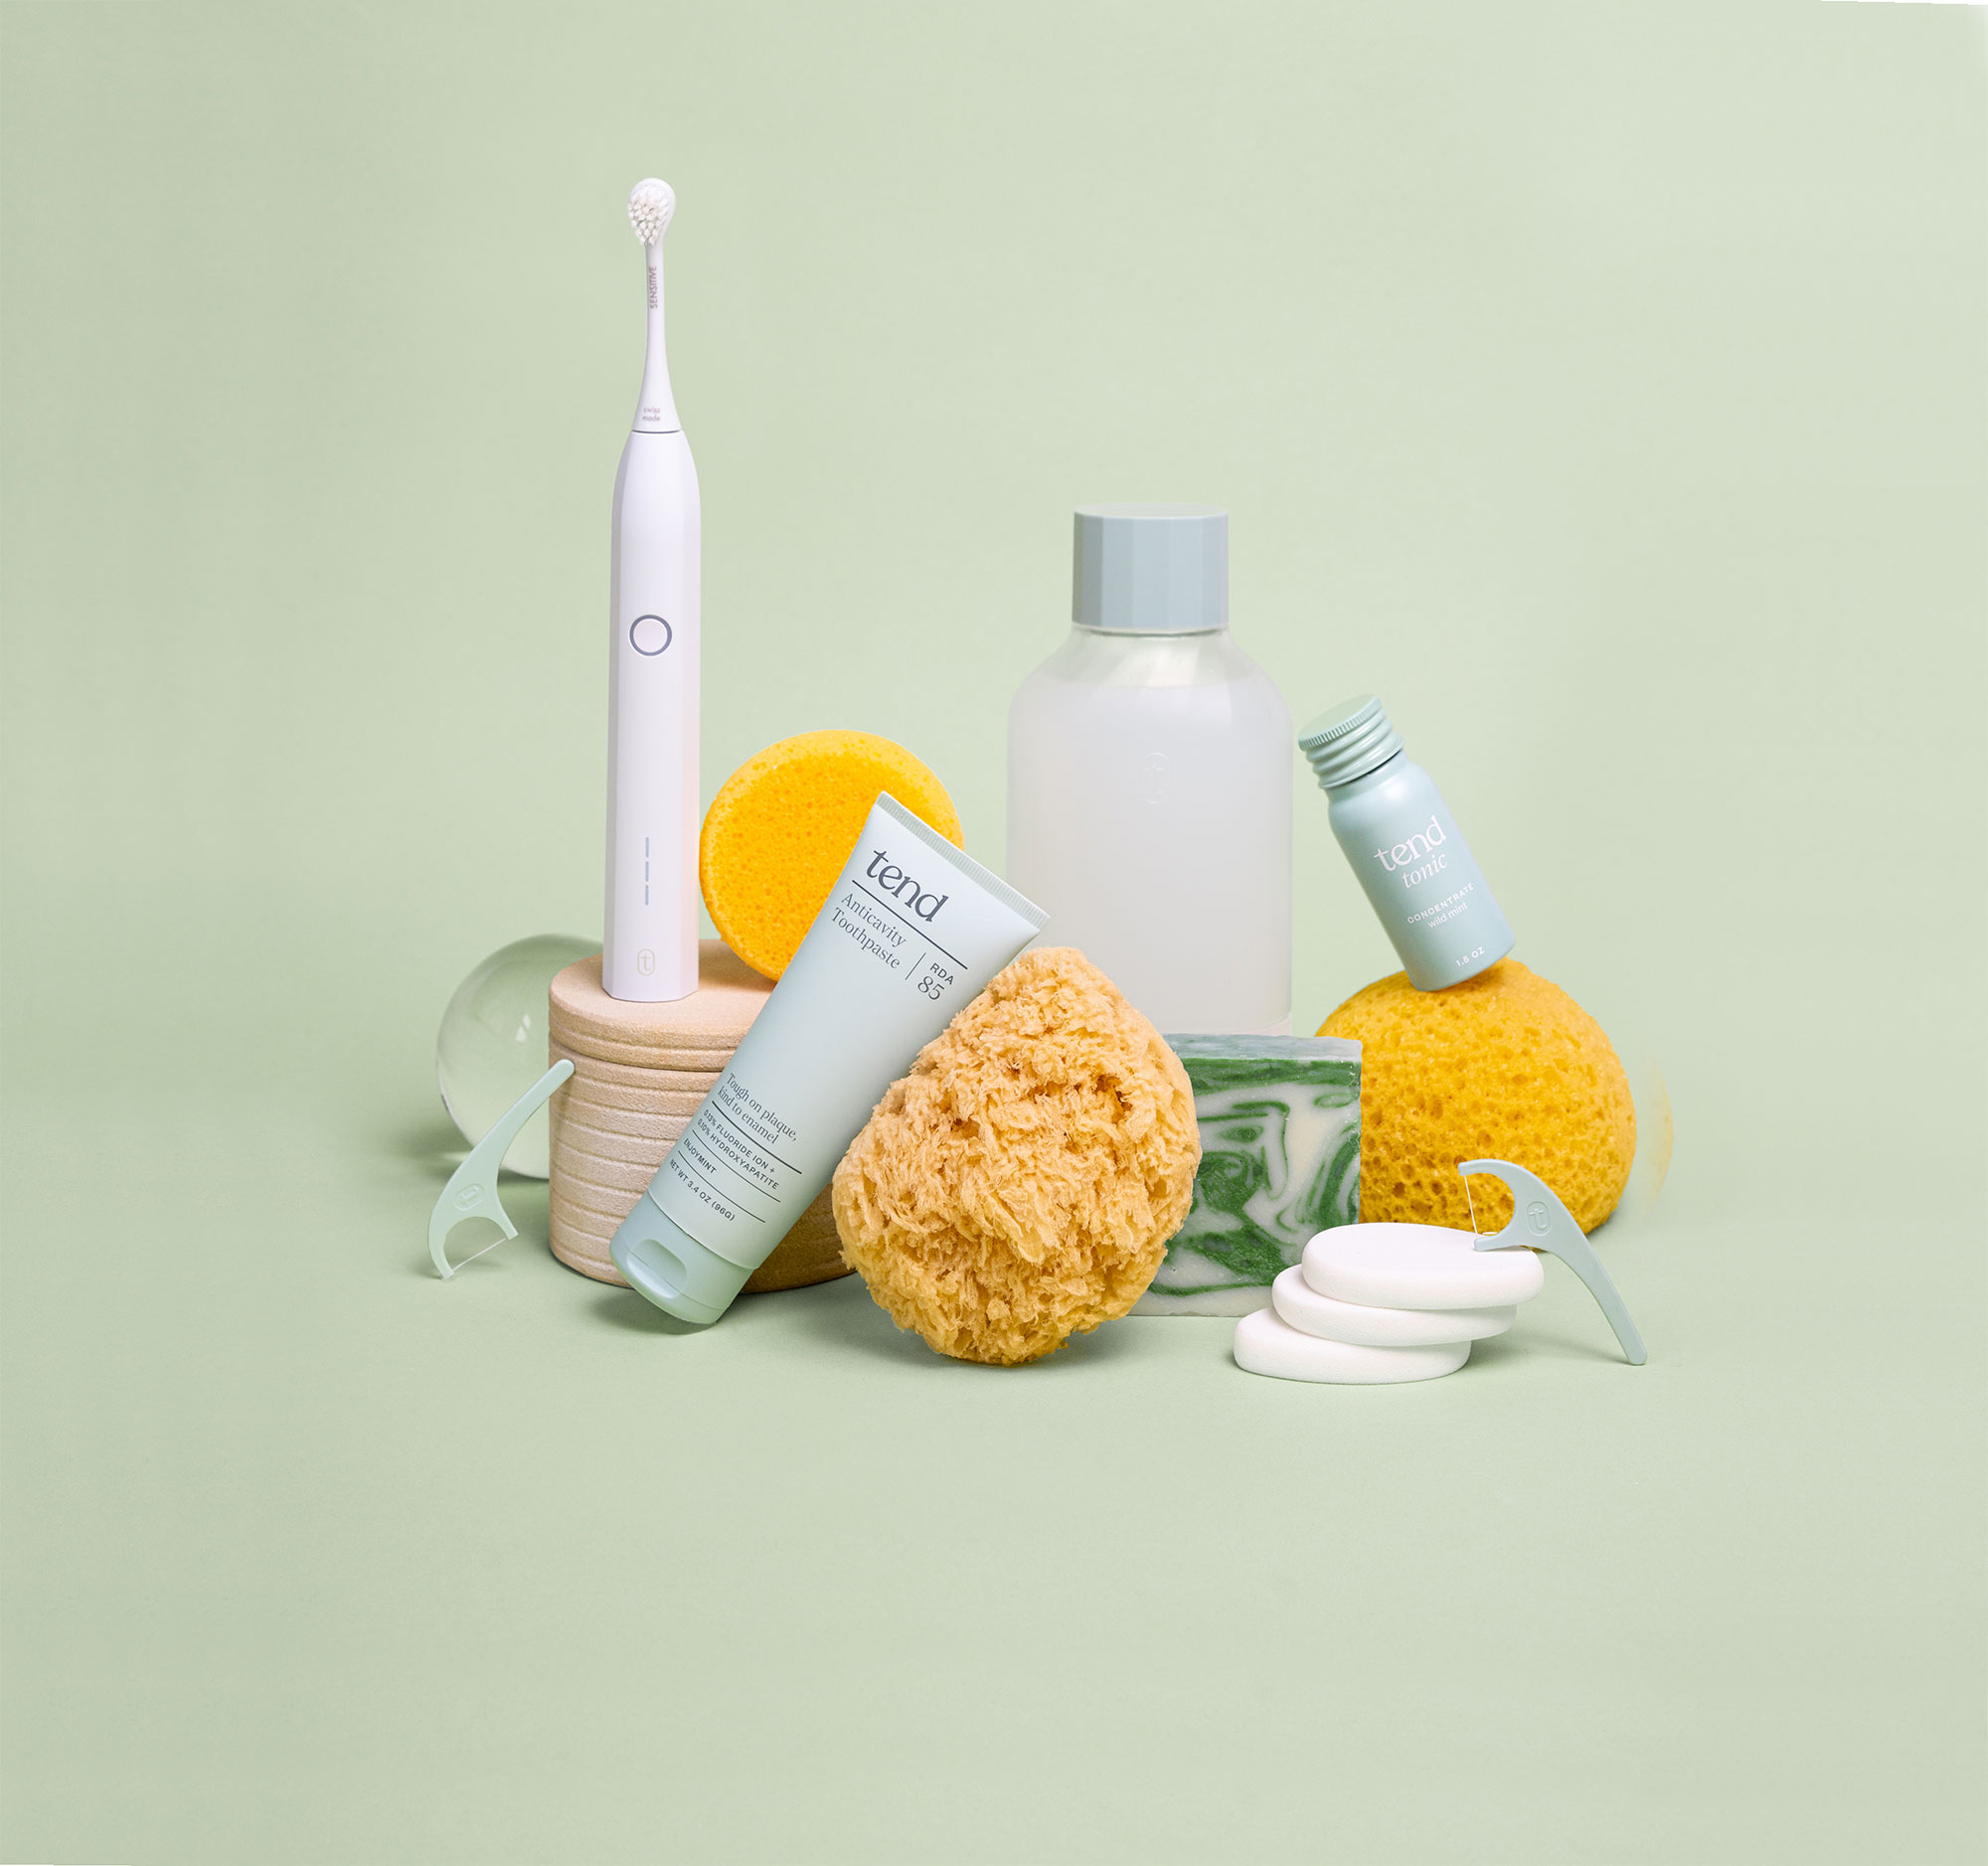 A Soothsonic, Anticavity Toothpaste, Tonic, and floss harps displayed with sponges and soaps